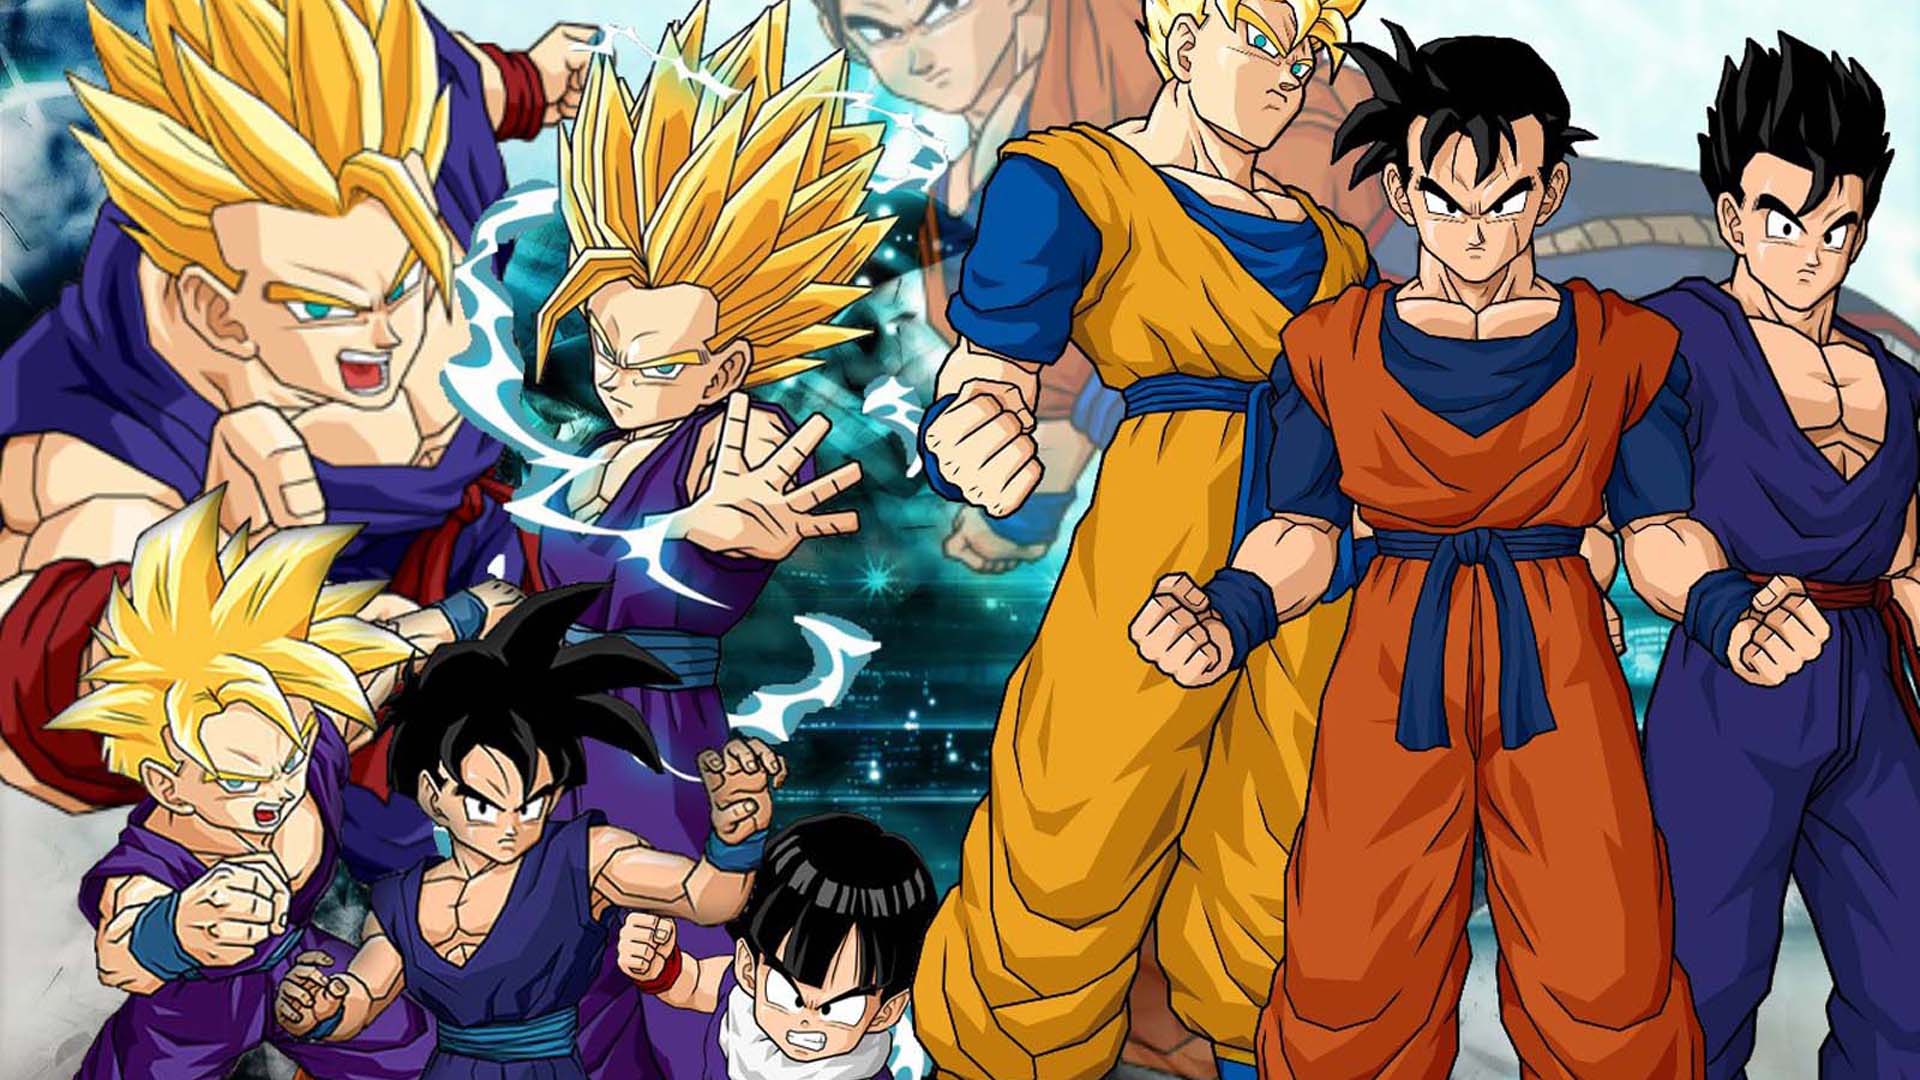 Dragon ball z hd wallpapers, desktop and phone wallpapers. 